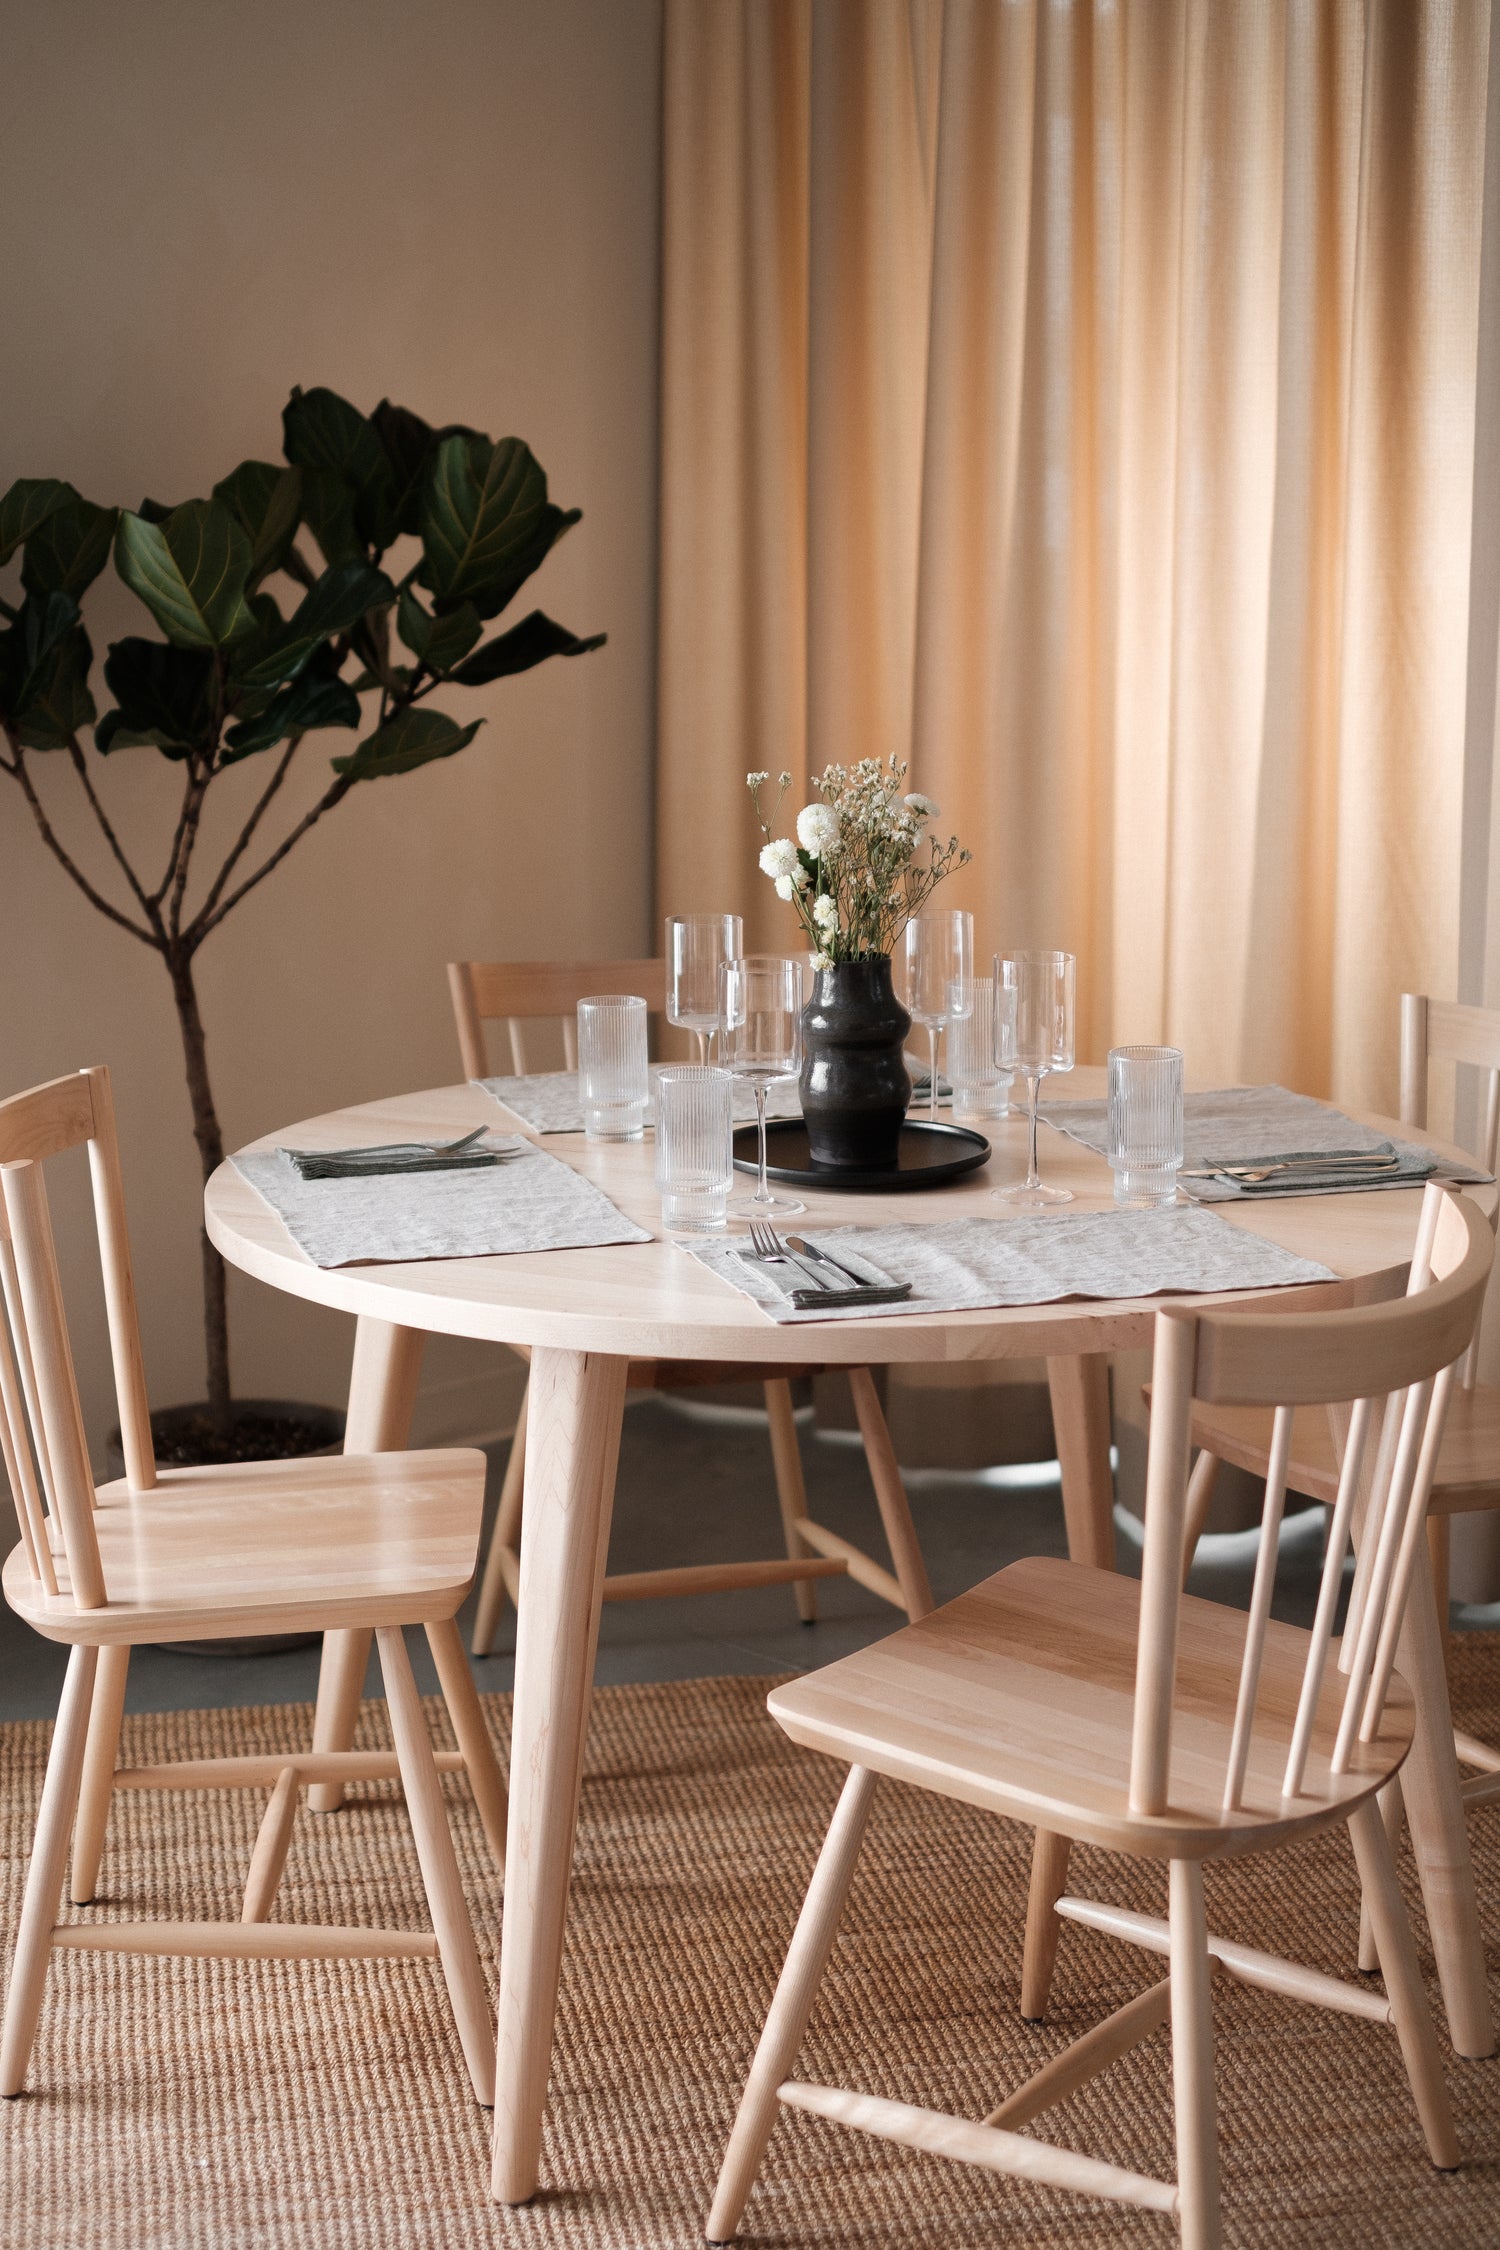 Round Oslo table + chairs